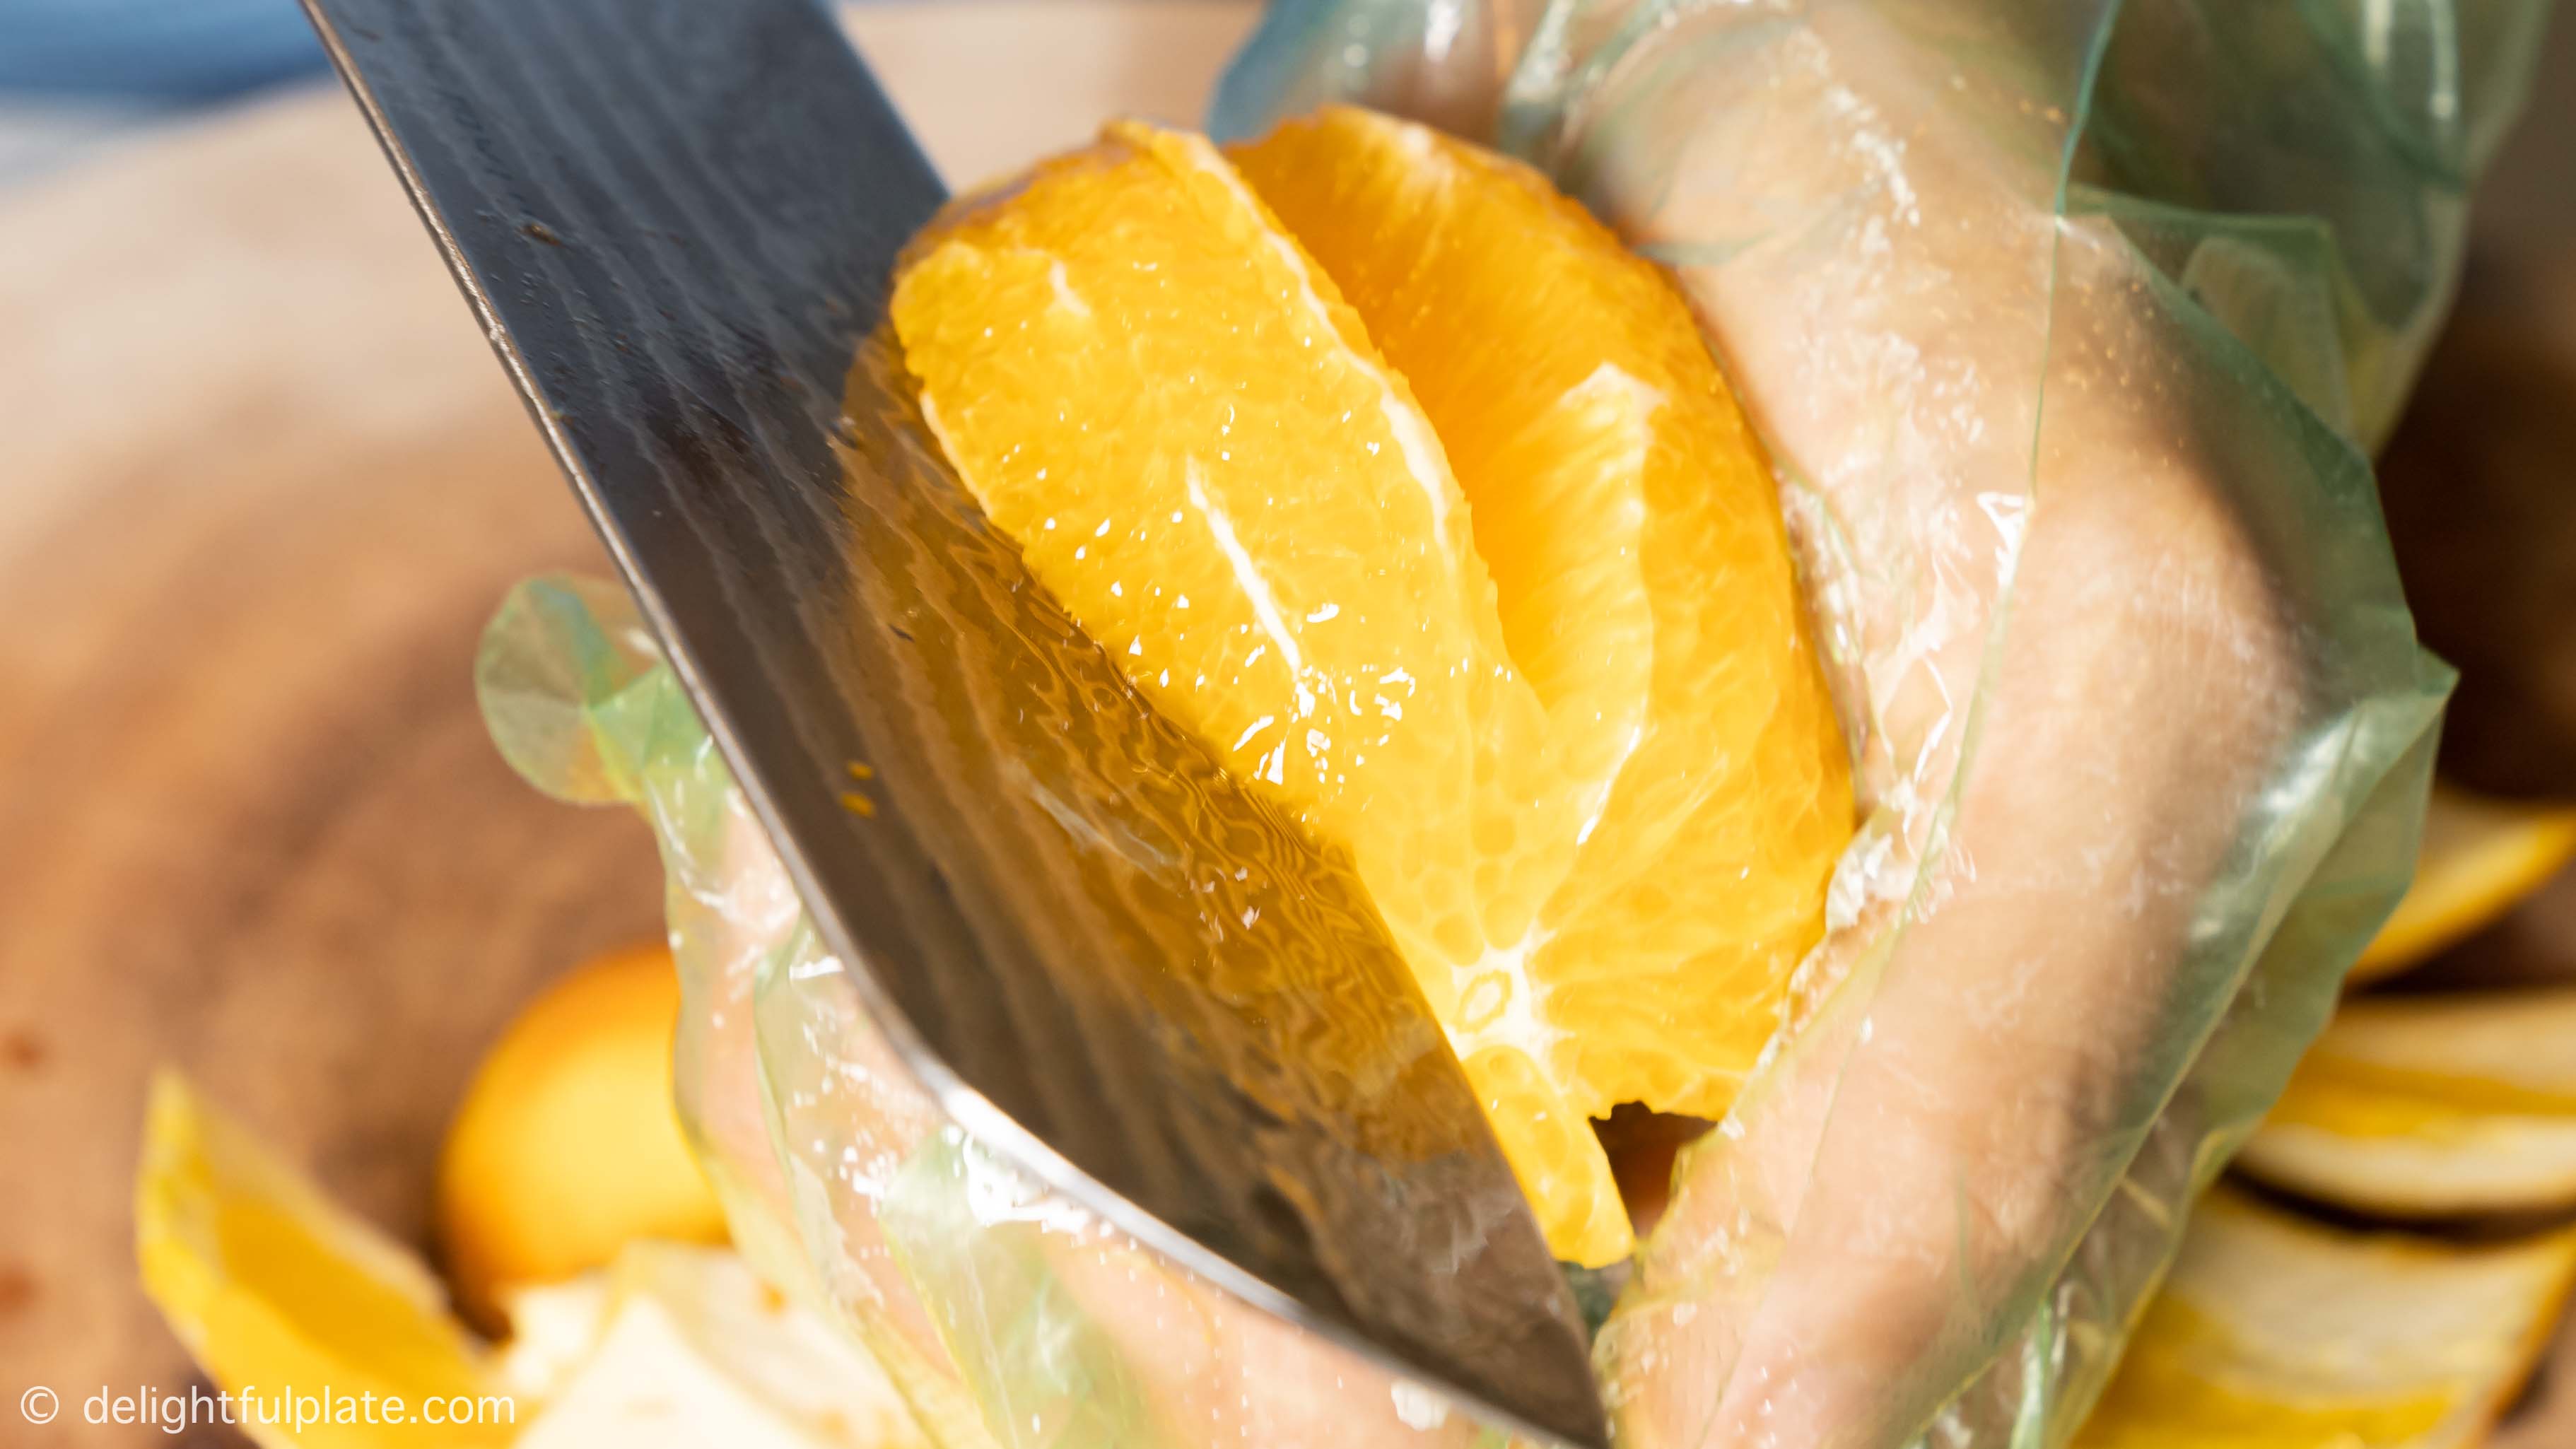 slicing oranges into segments with a knife